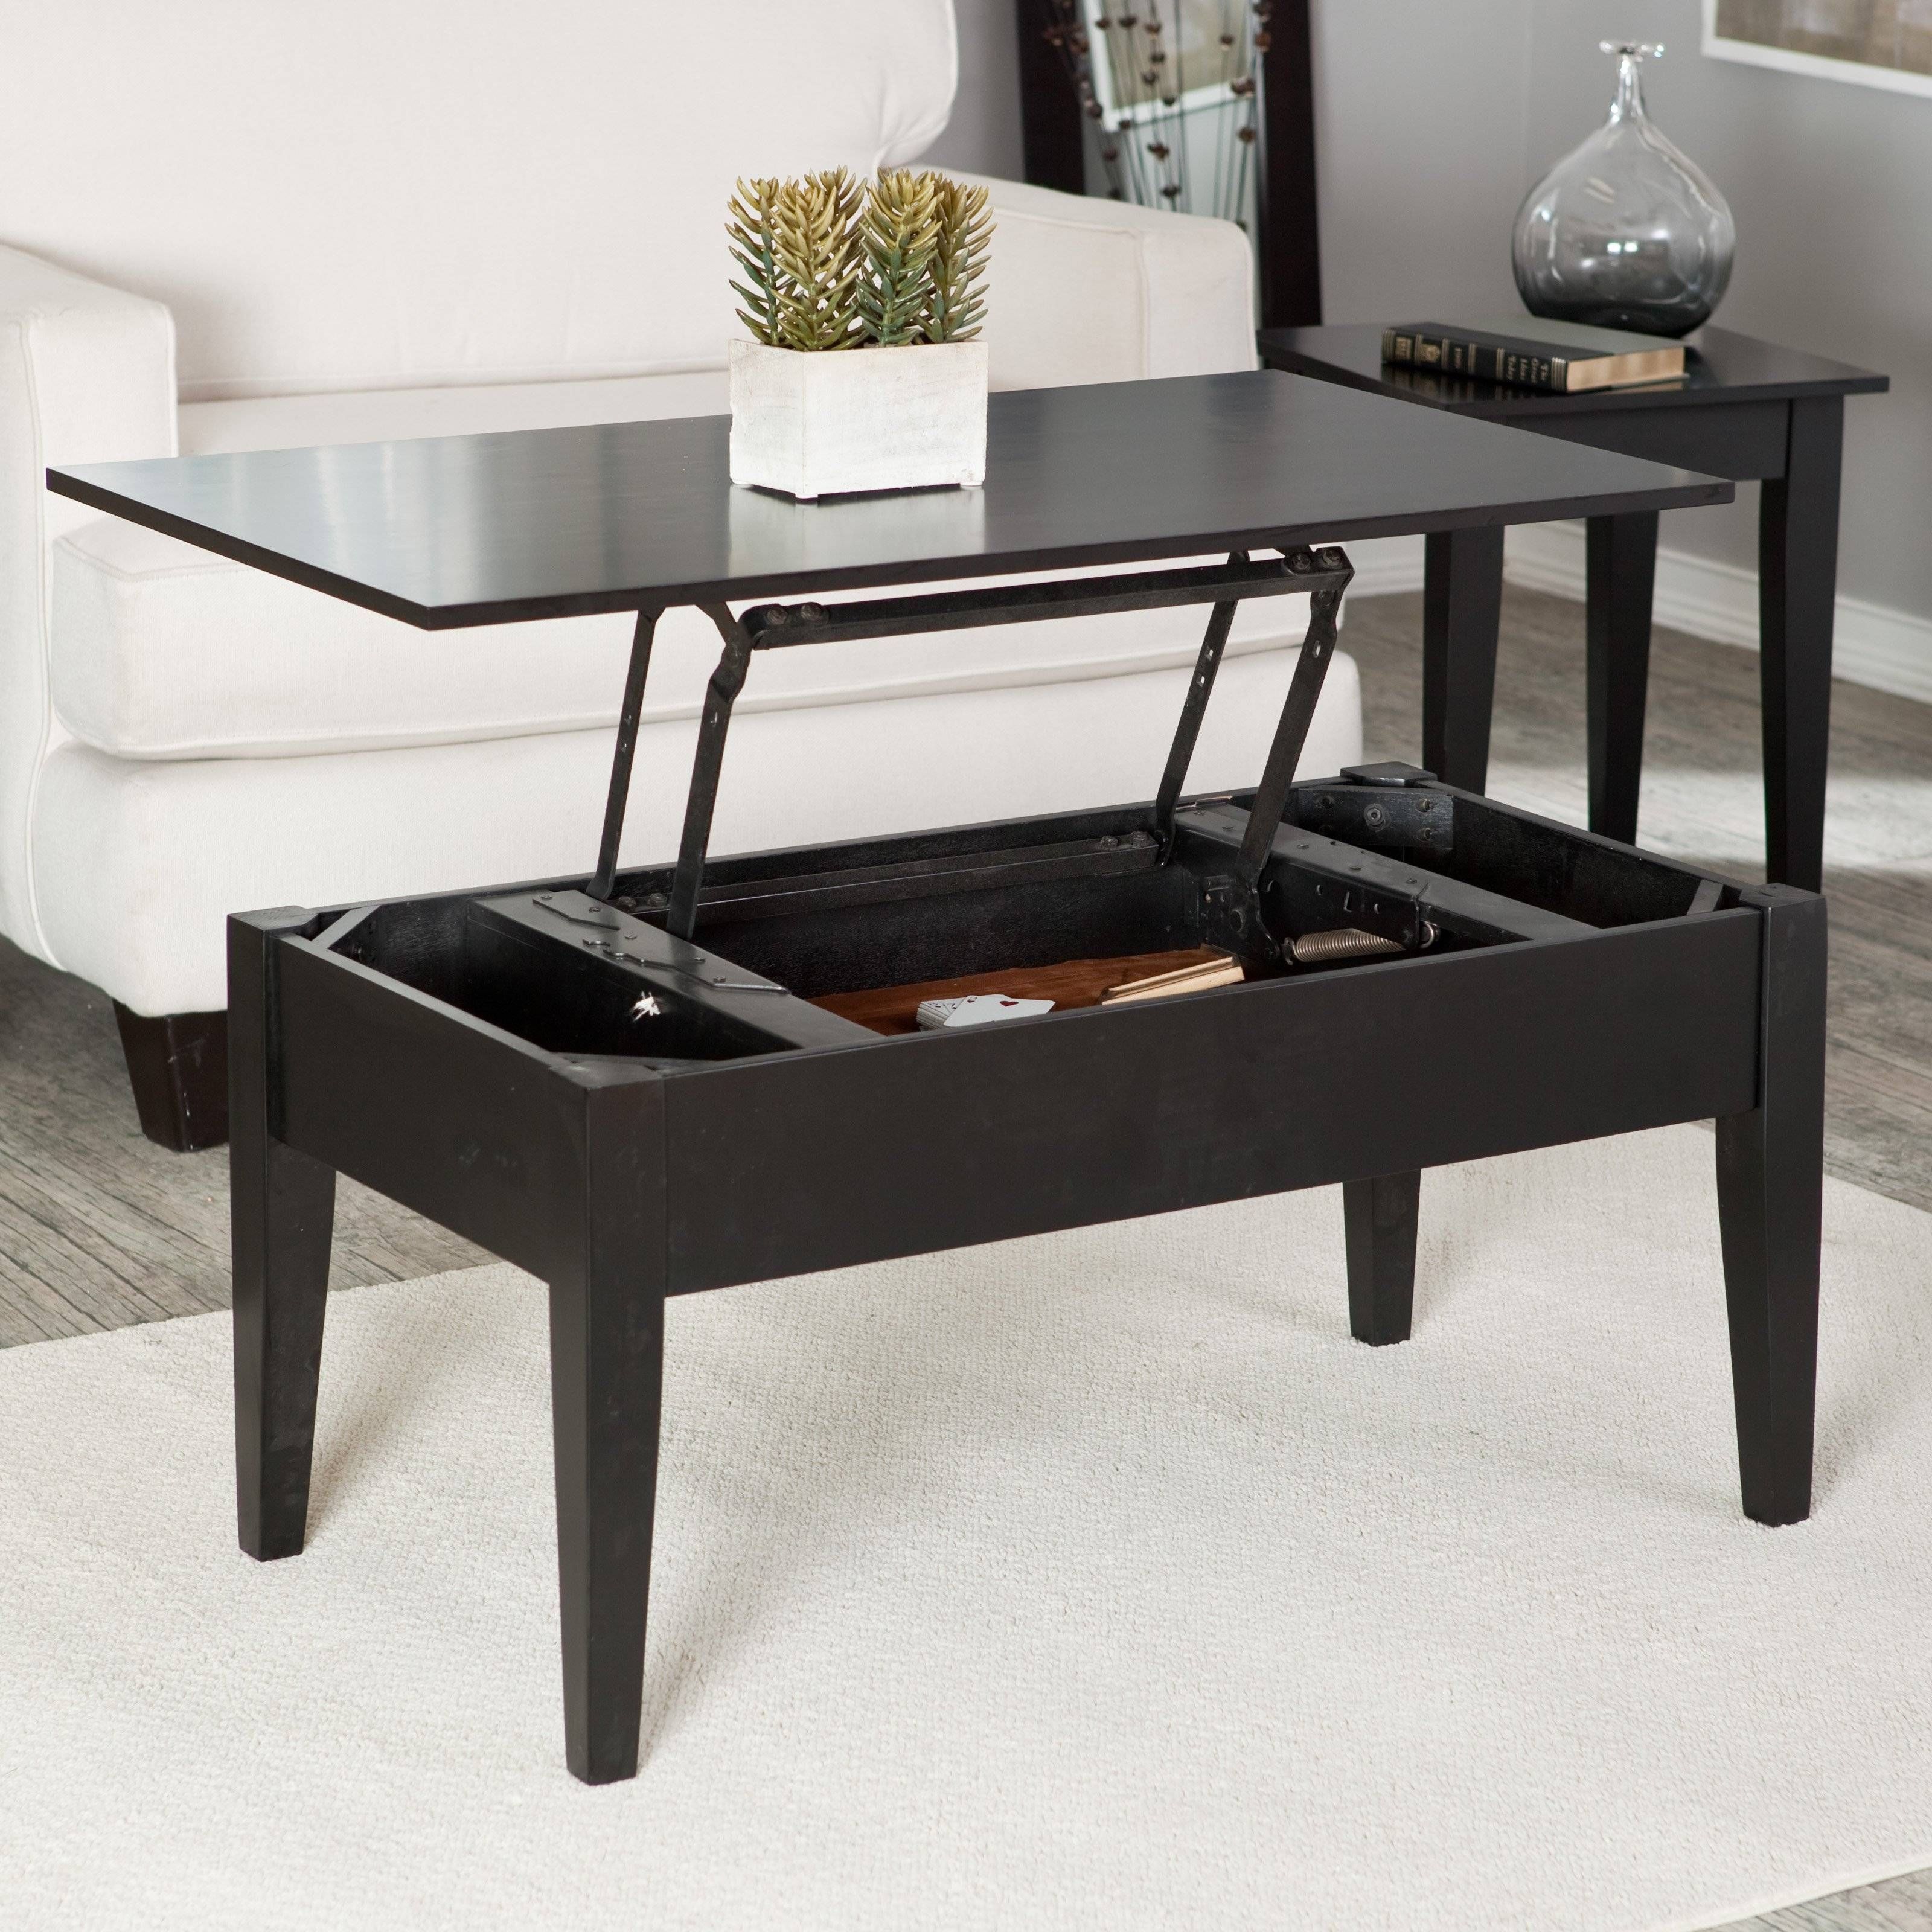 Turner Lift Top Coffee Table – Espresso | Hayneedle Within Coffee Table With Raised Top (Photo 2 of 30)